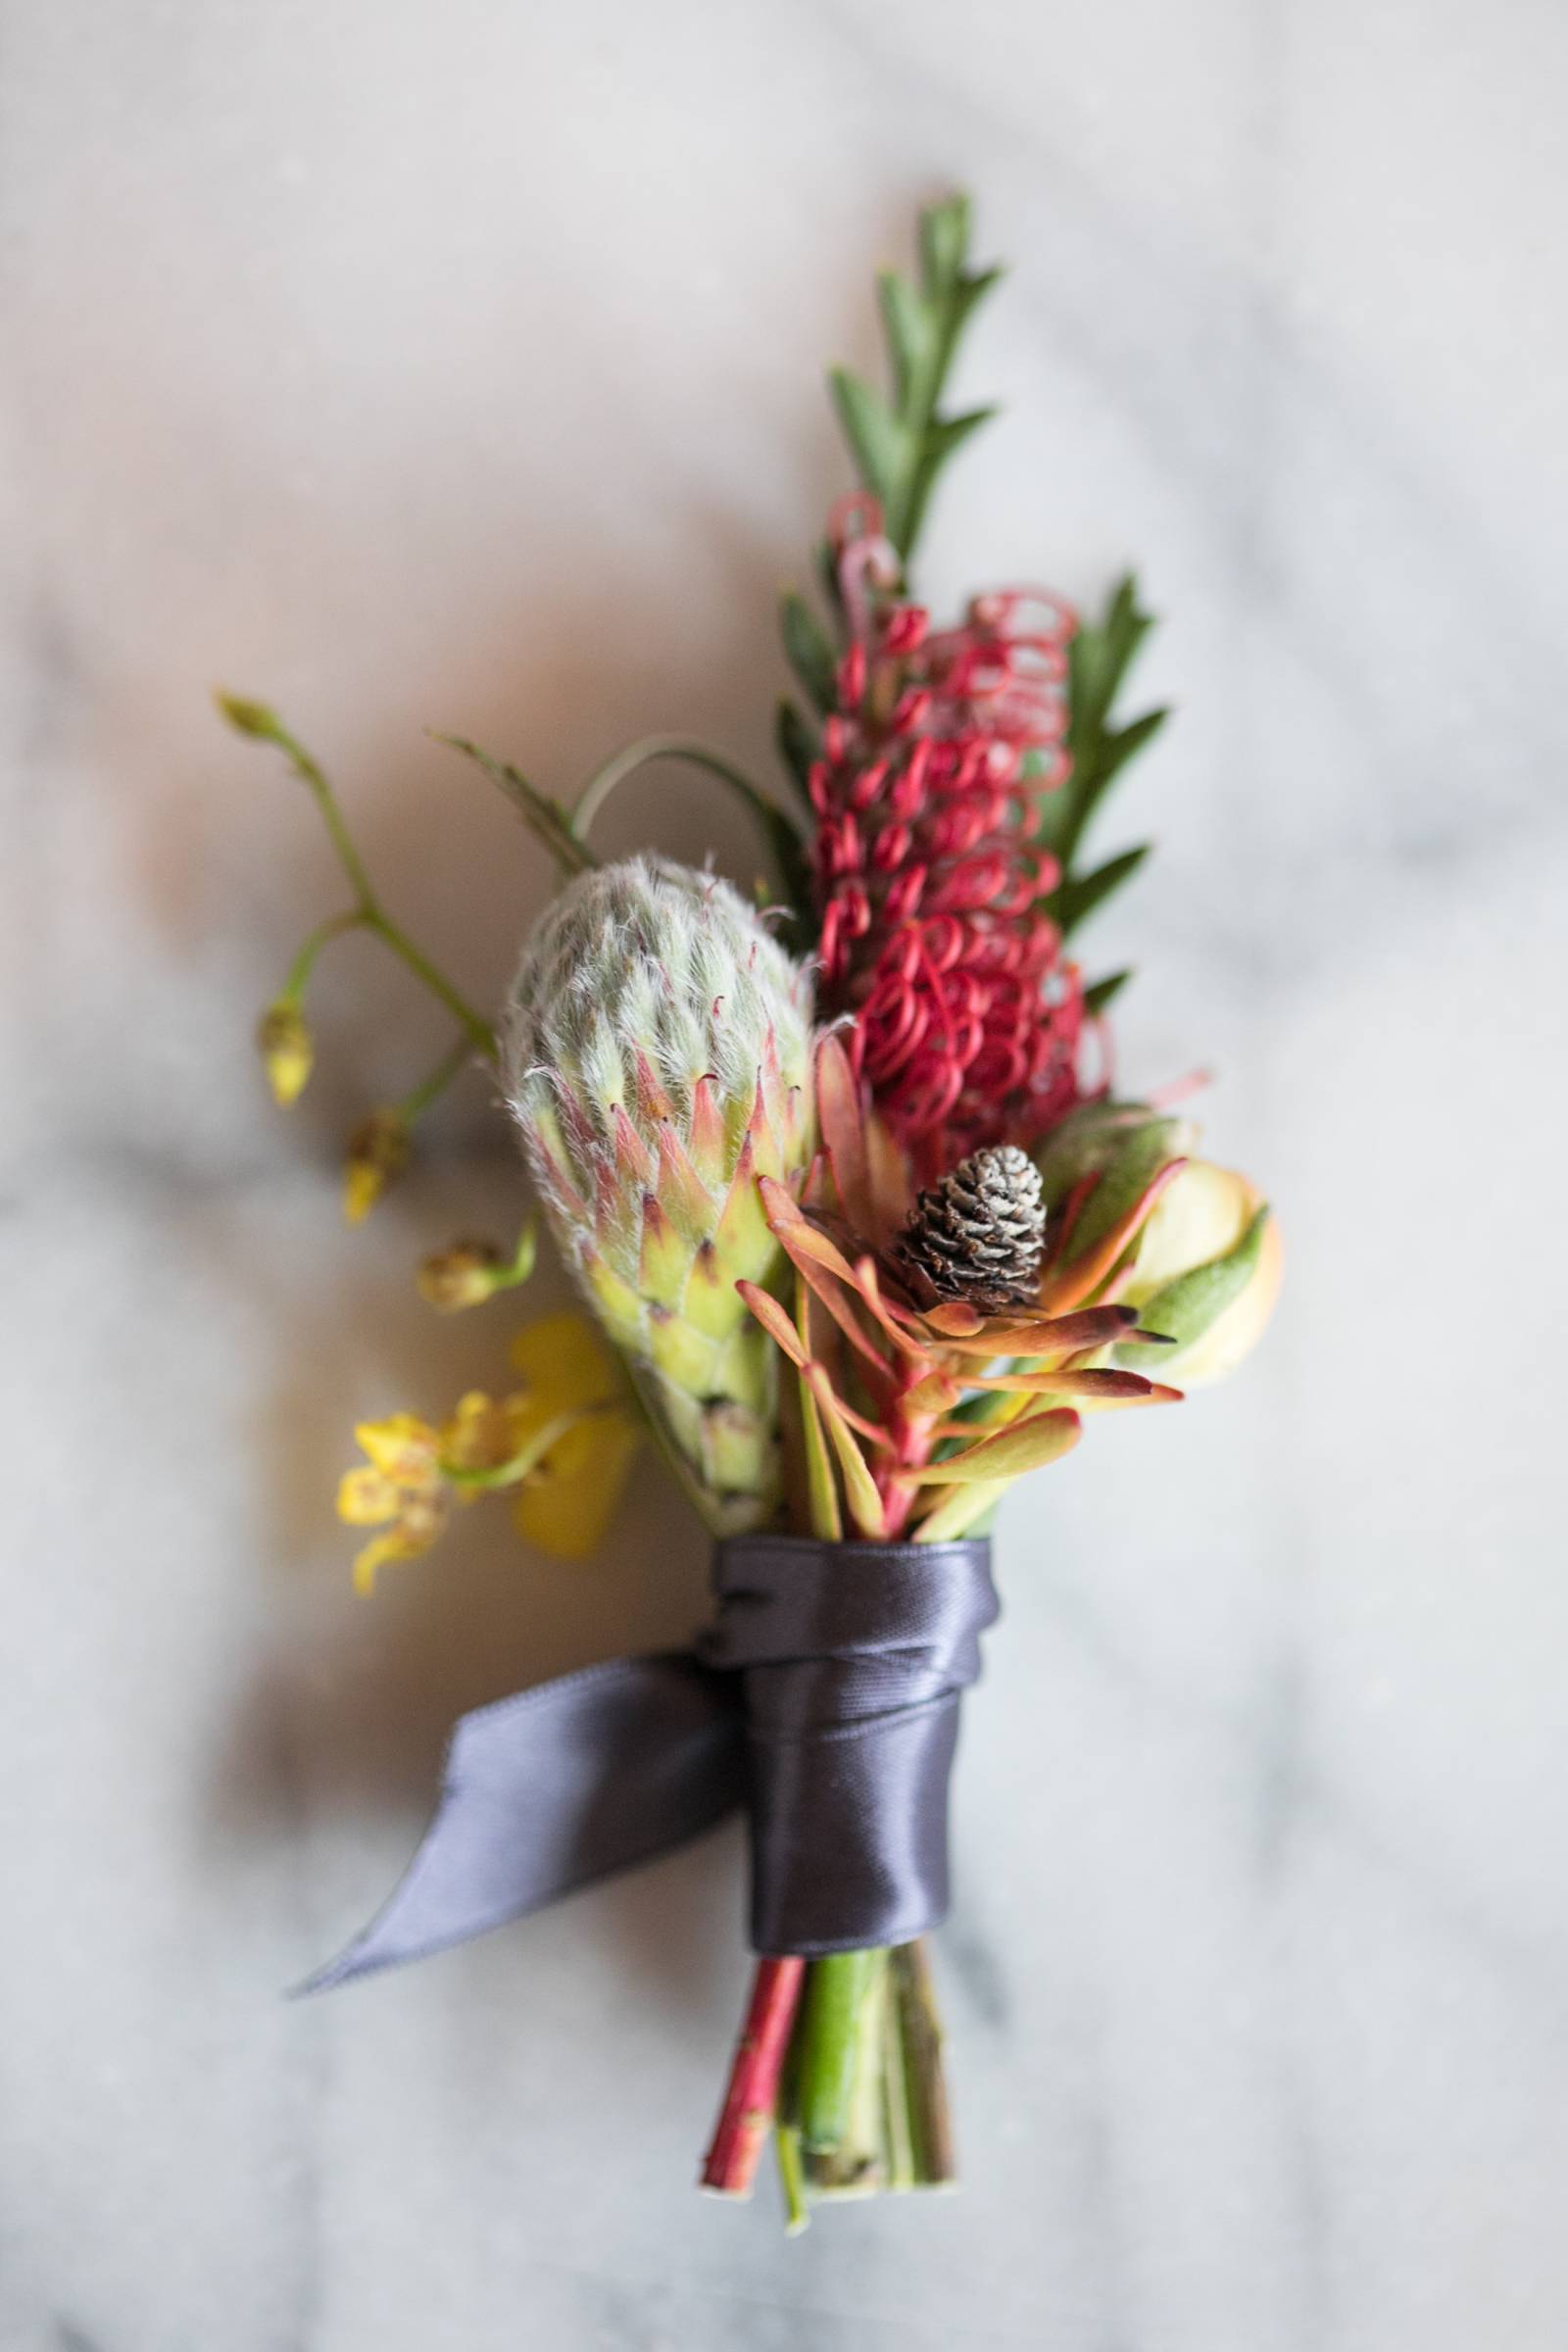 Colorful Boutonniere